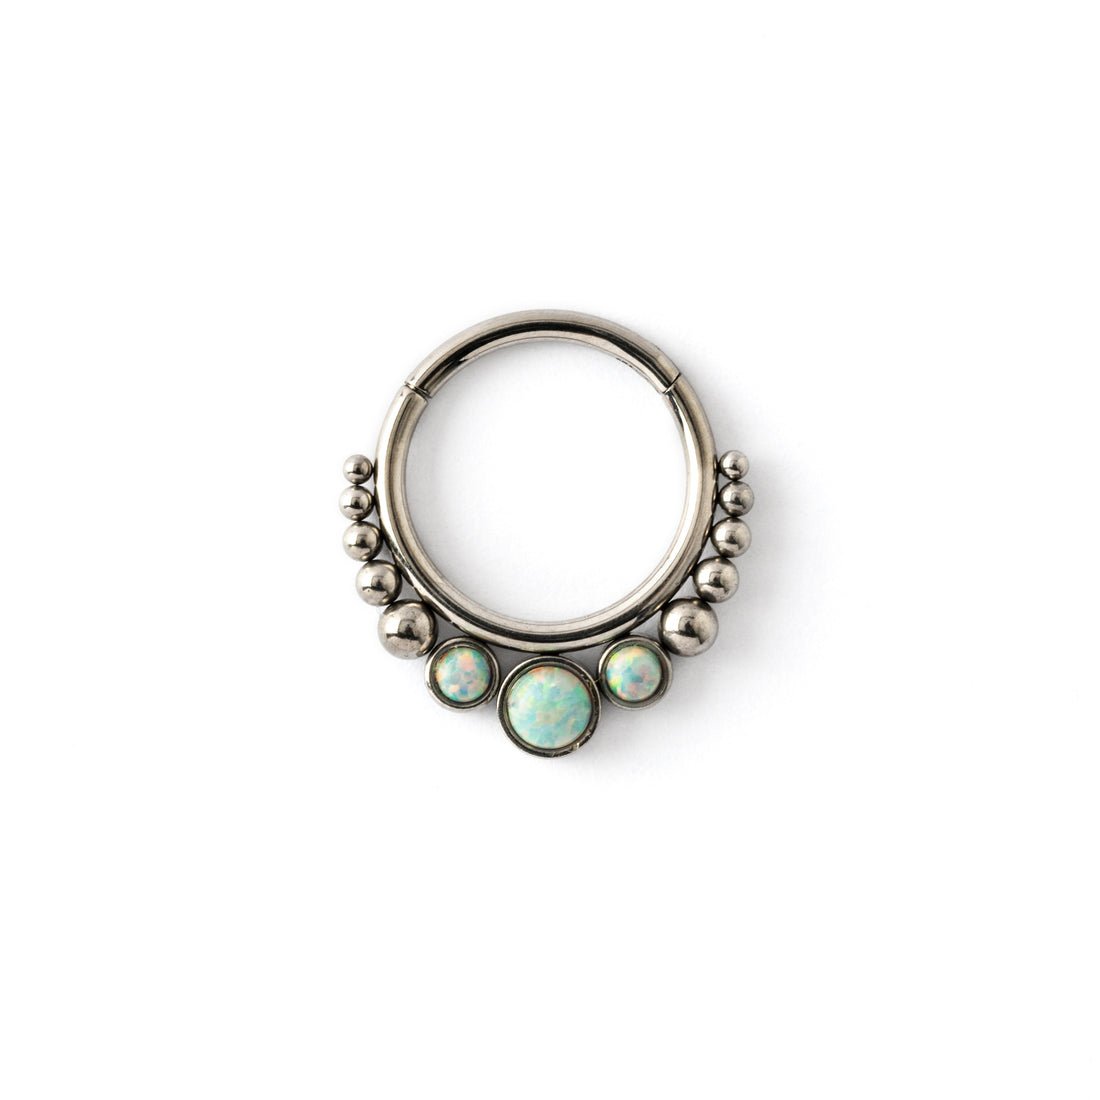 Surgical steel septum clicker ring with Opal frontal view